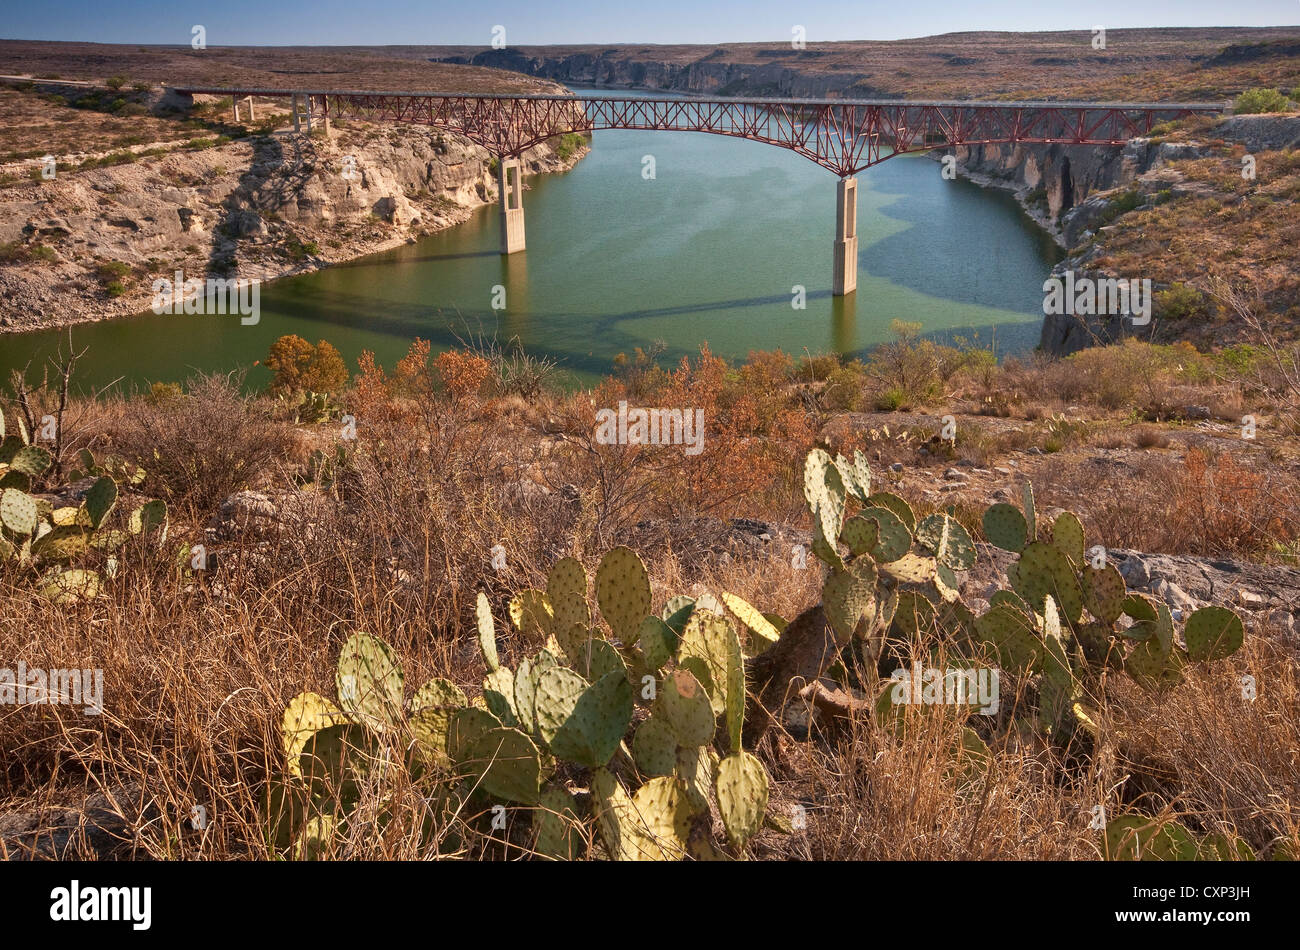 Highway bridge over Pecos River Canyon near its mouth to Rio Grande and Lake Amistad, Chihuahuan Desert near Comstock, Texas USA Stock Photo